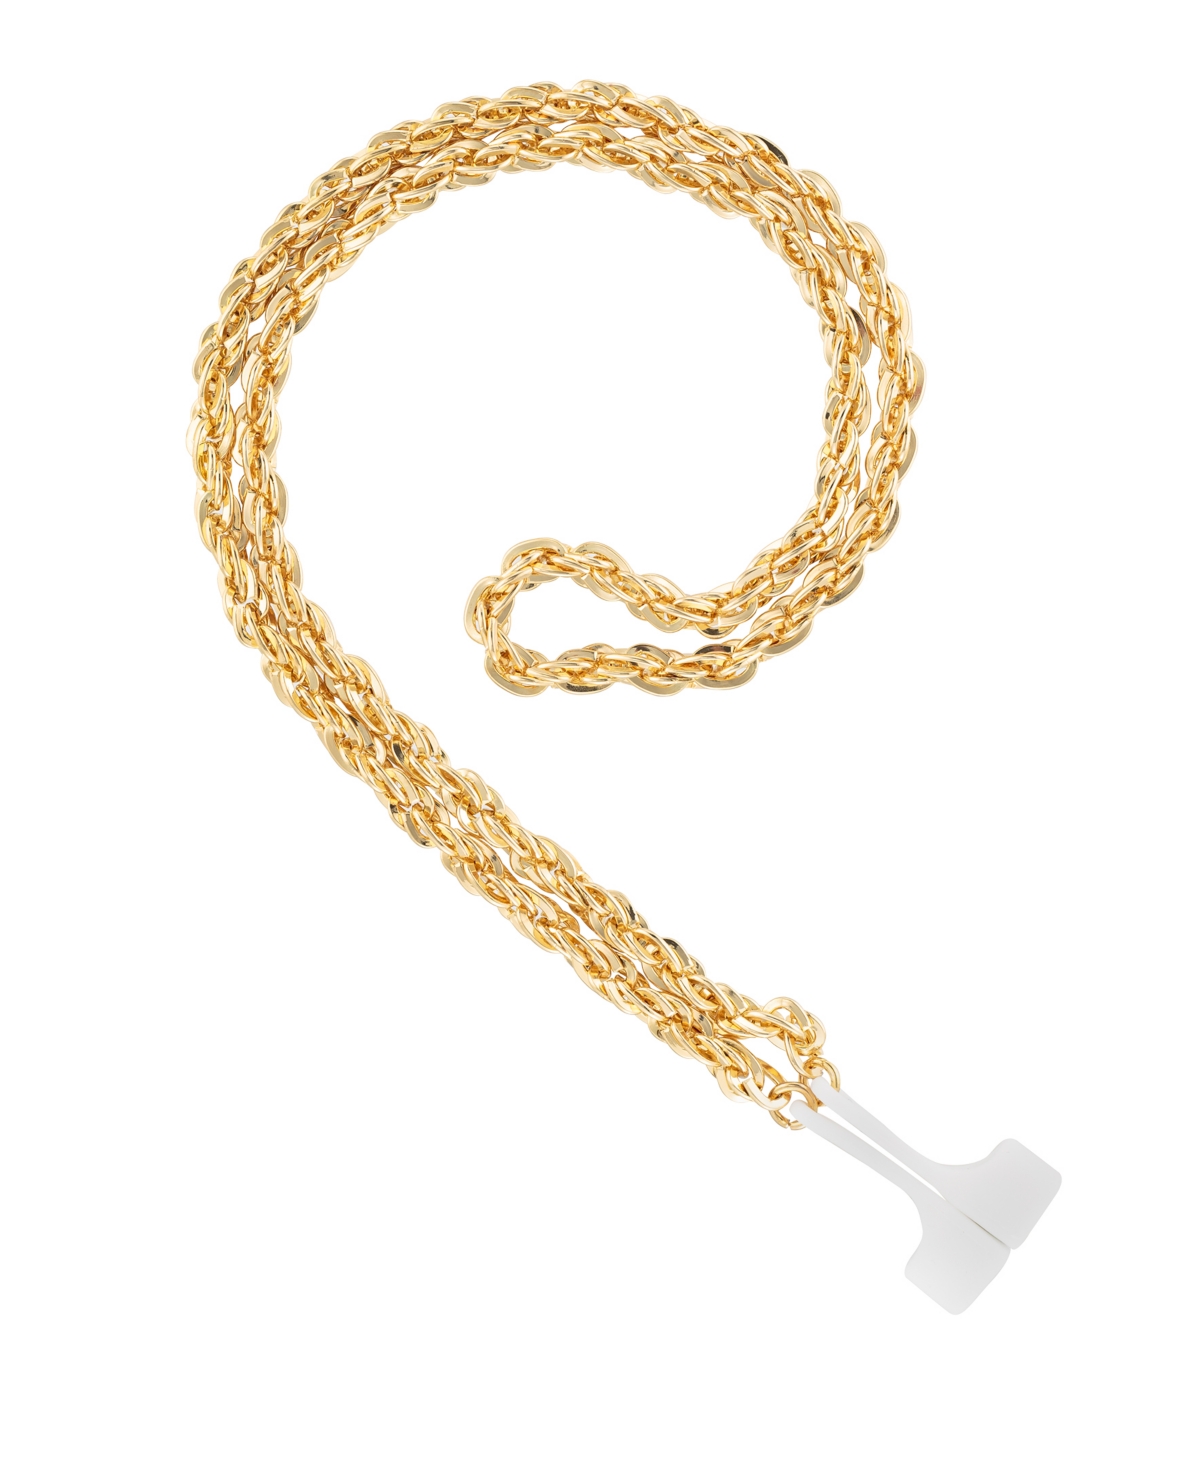 Women's Gold-Tone Alloy Chain Compatible with Apple AirPods and AirPods Pro - Gold-Tone